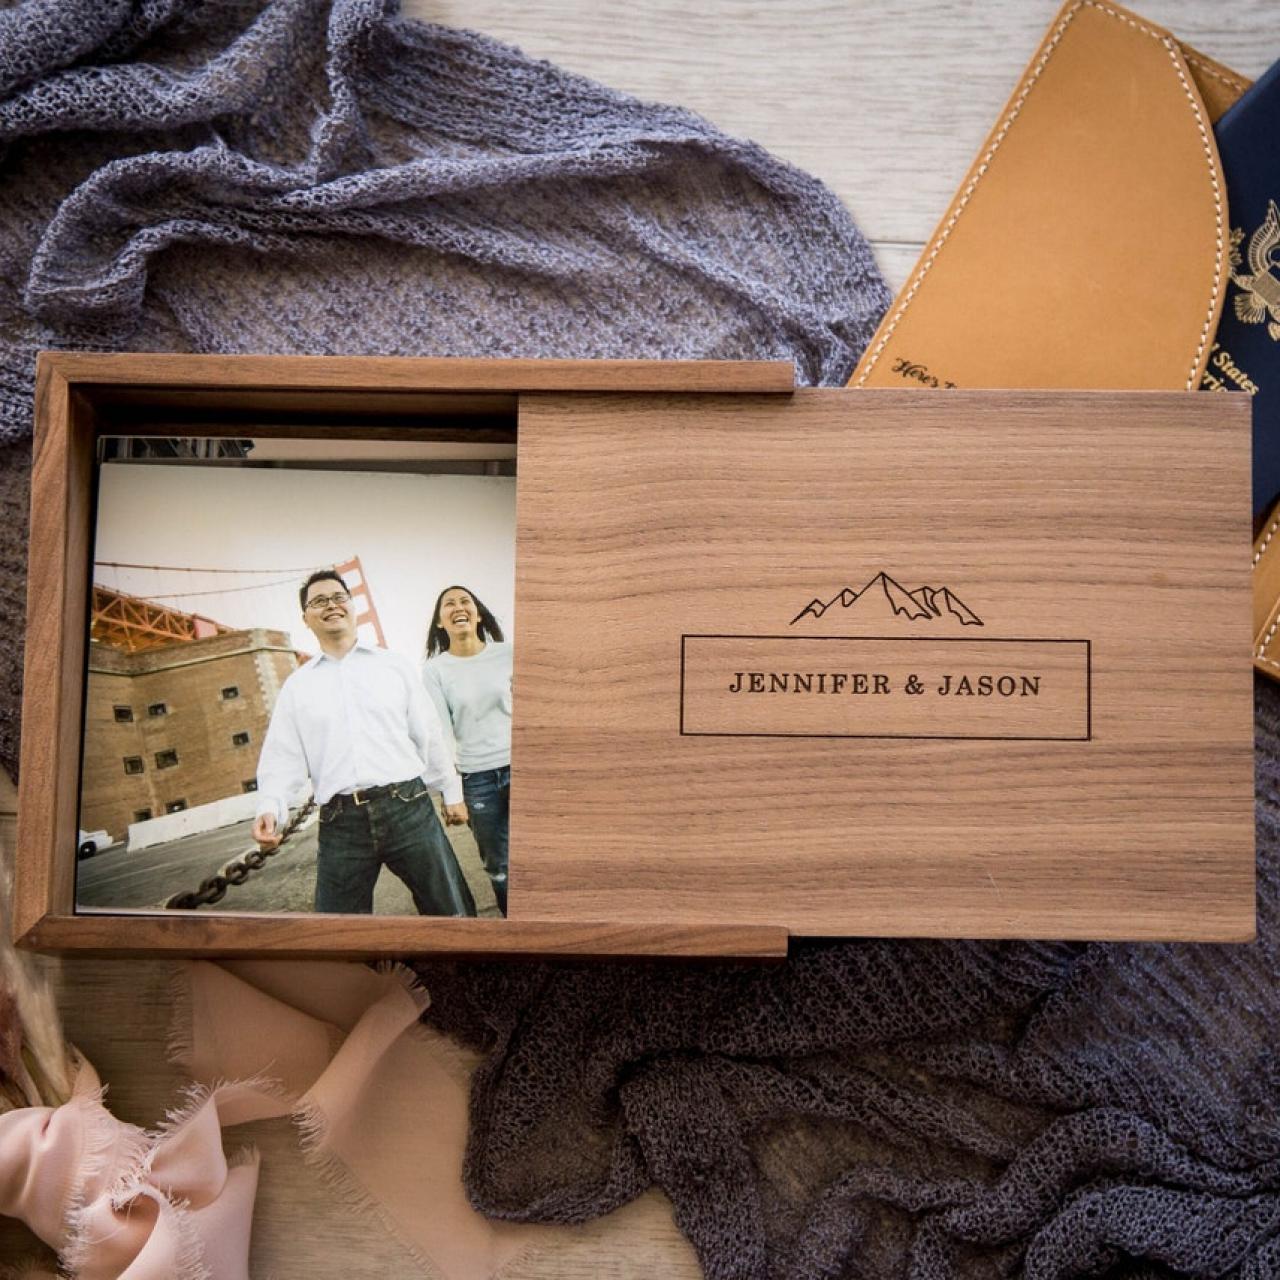 Unique personalized gifts sure to WOW everyone on your list